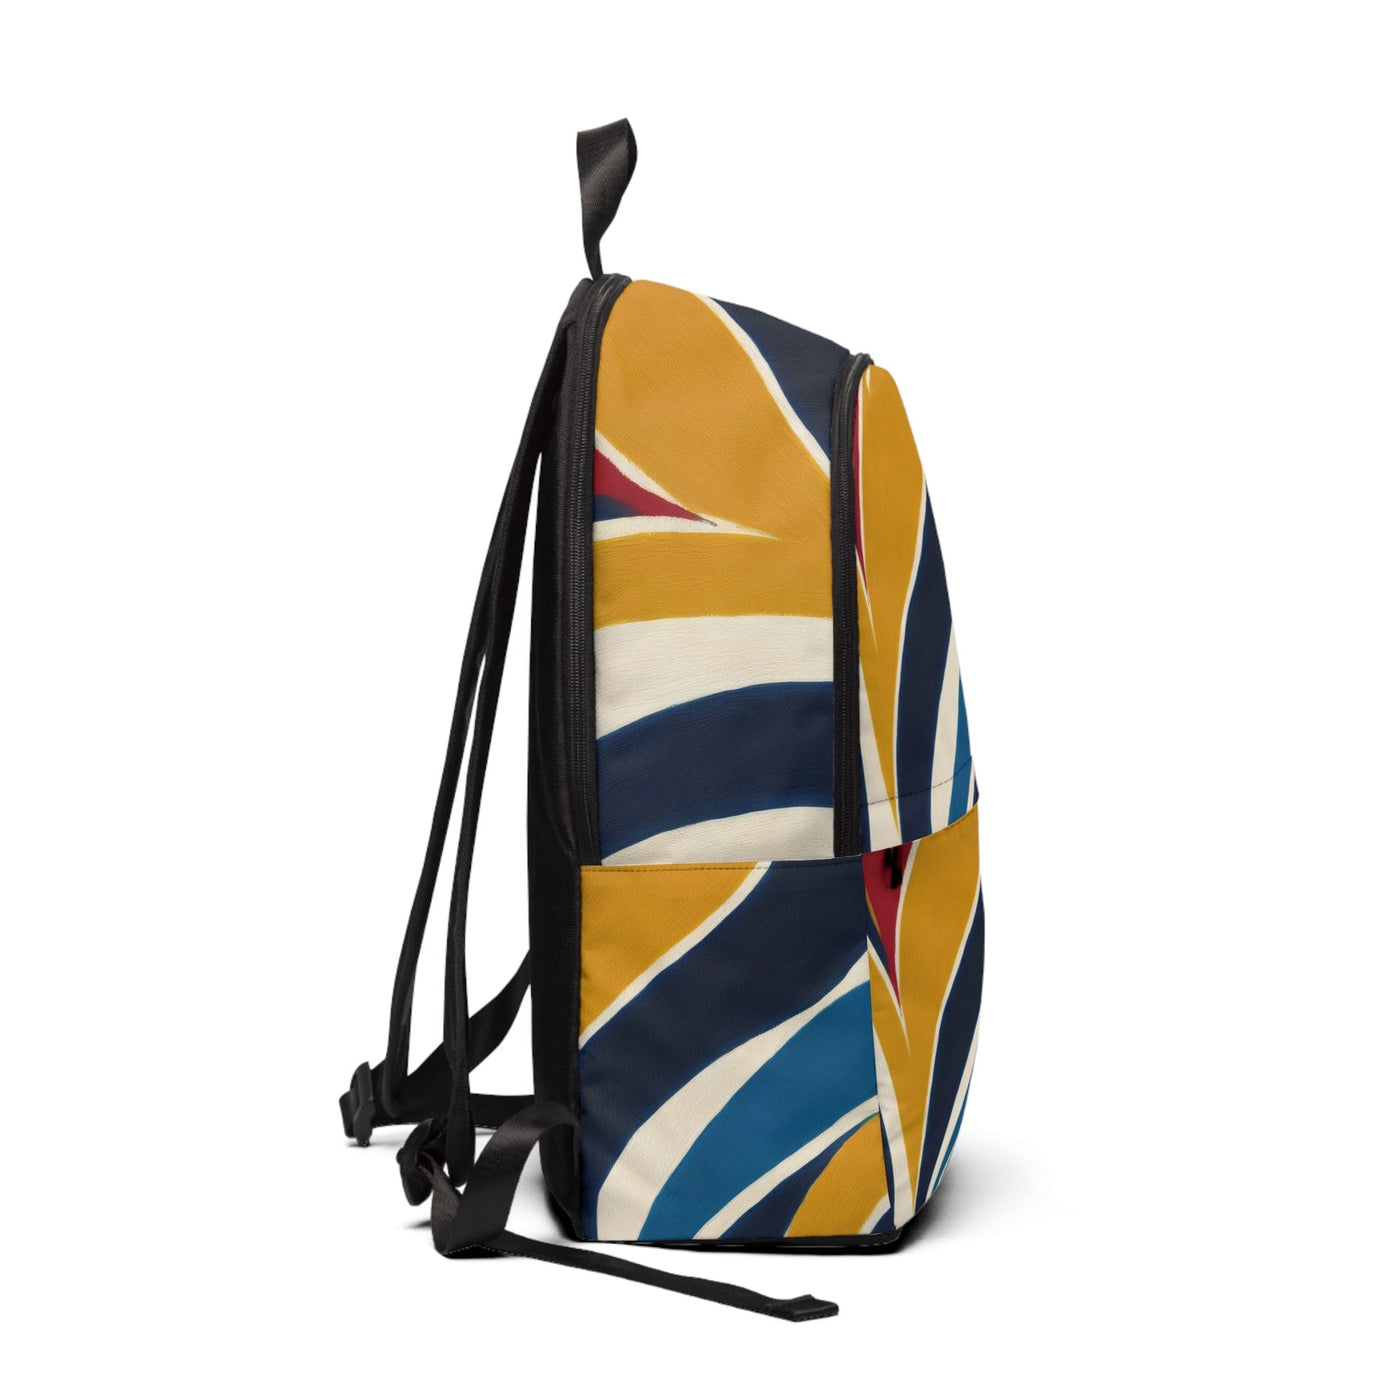 Fashion Backpack Waterproof Abstract Multicolor Swirl Line Pattern 78386 - Bags